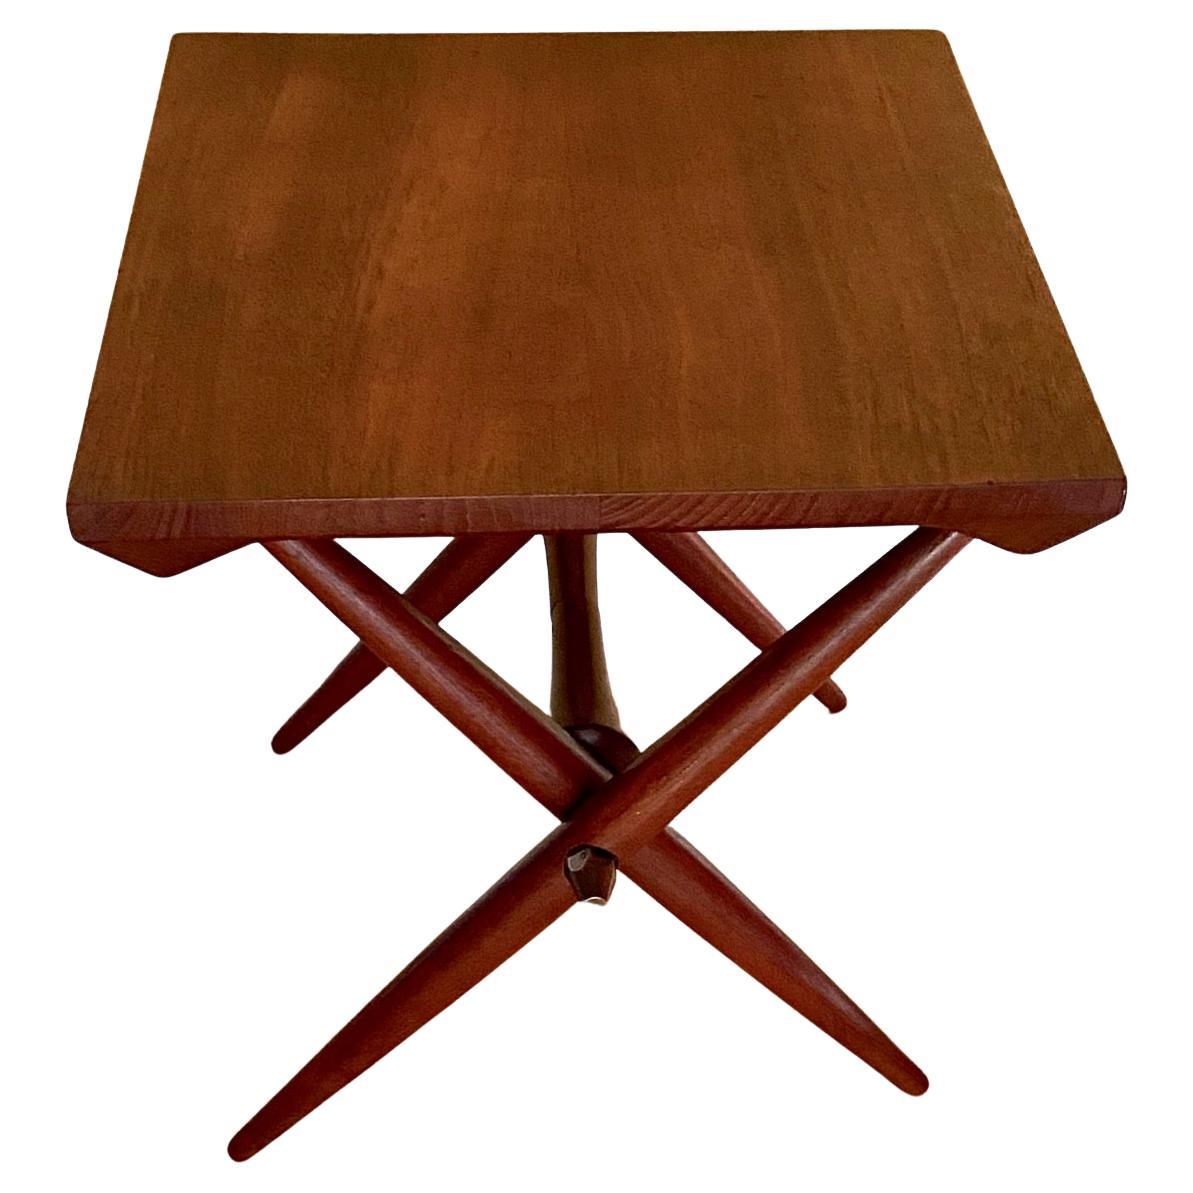 Midcentury Danish small teak table, 1960's, Dansk, attributed to Jens Quistgaard In Good Condition For Sale In London, GB